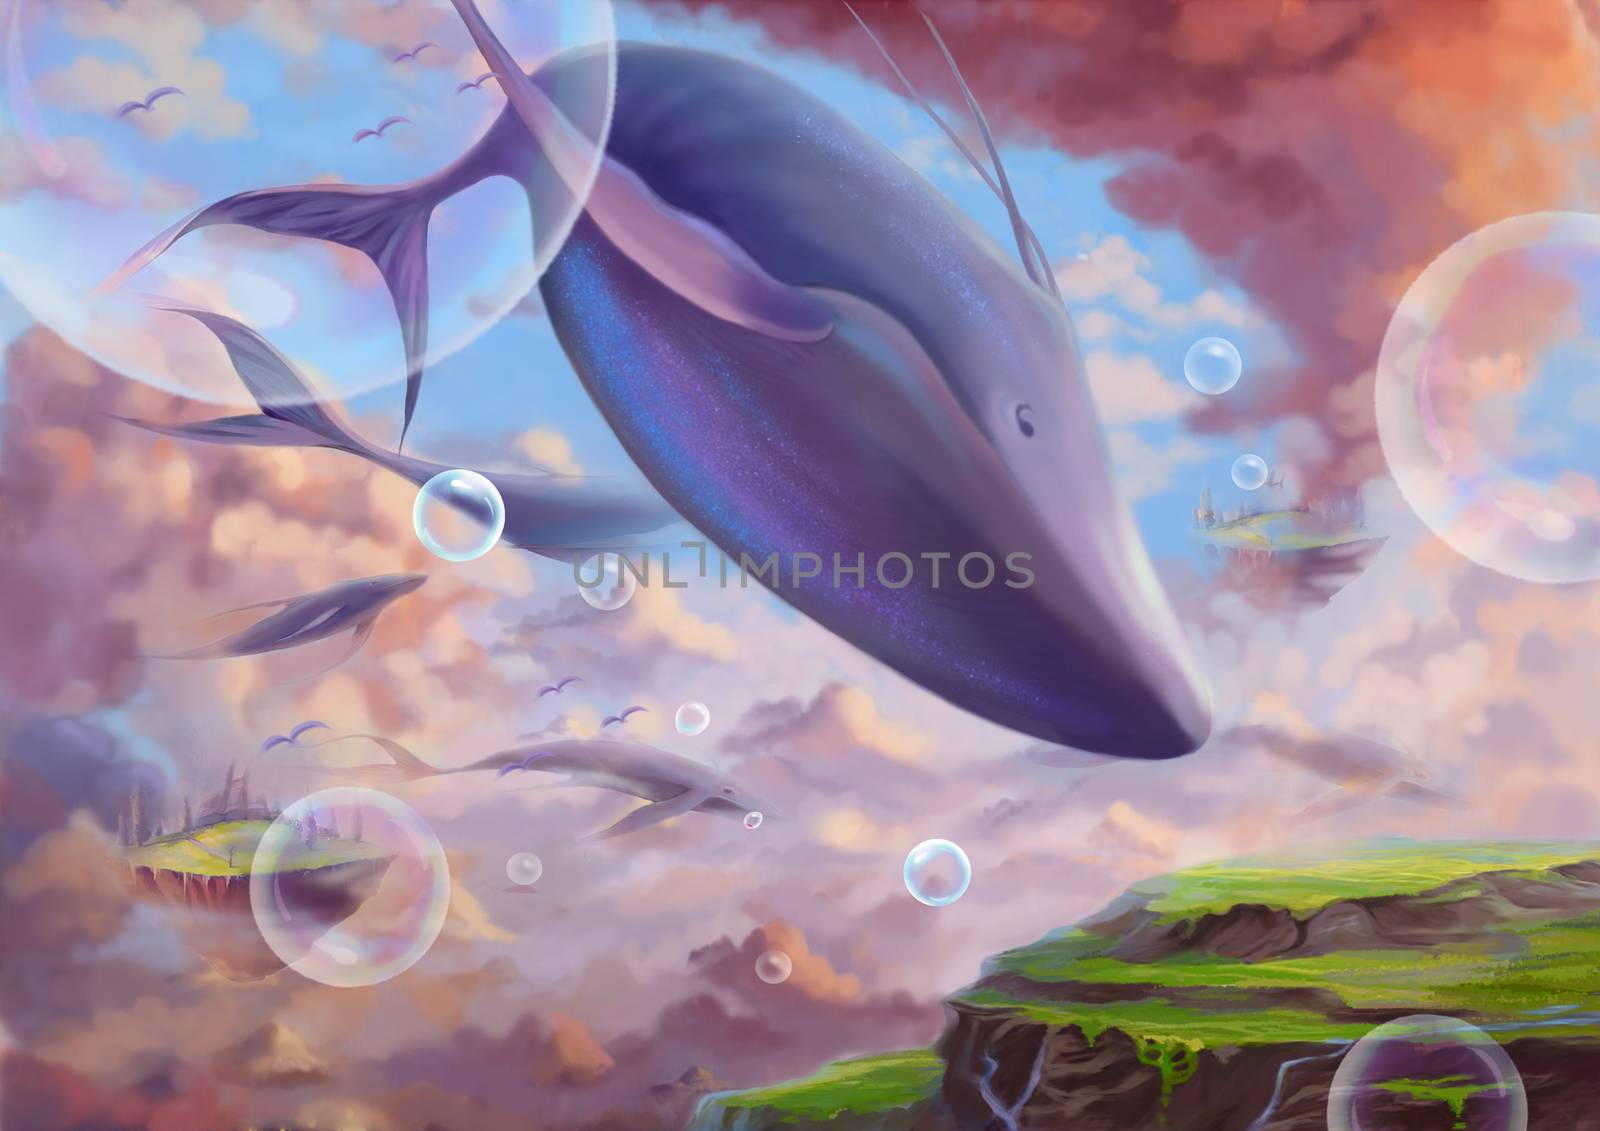 Illustration: A Fantastic Wonderland with flying Lands and Whales. Fantastic Cartoon Style Wallpaper Background Scene Design with Story. by NextMars